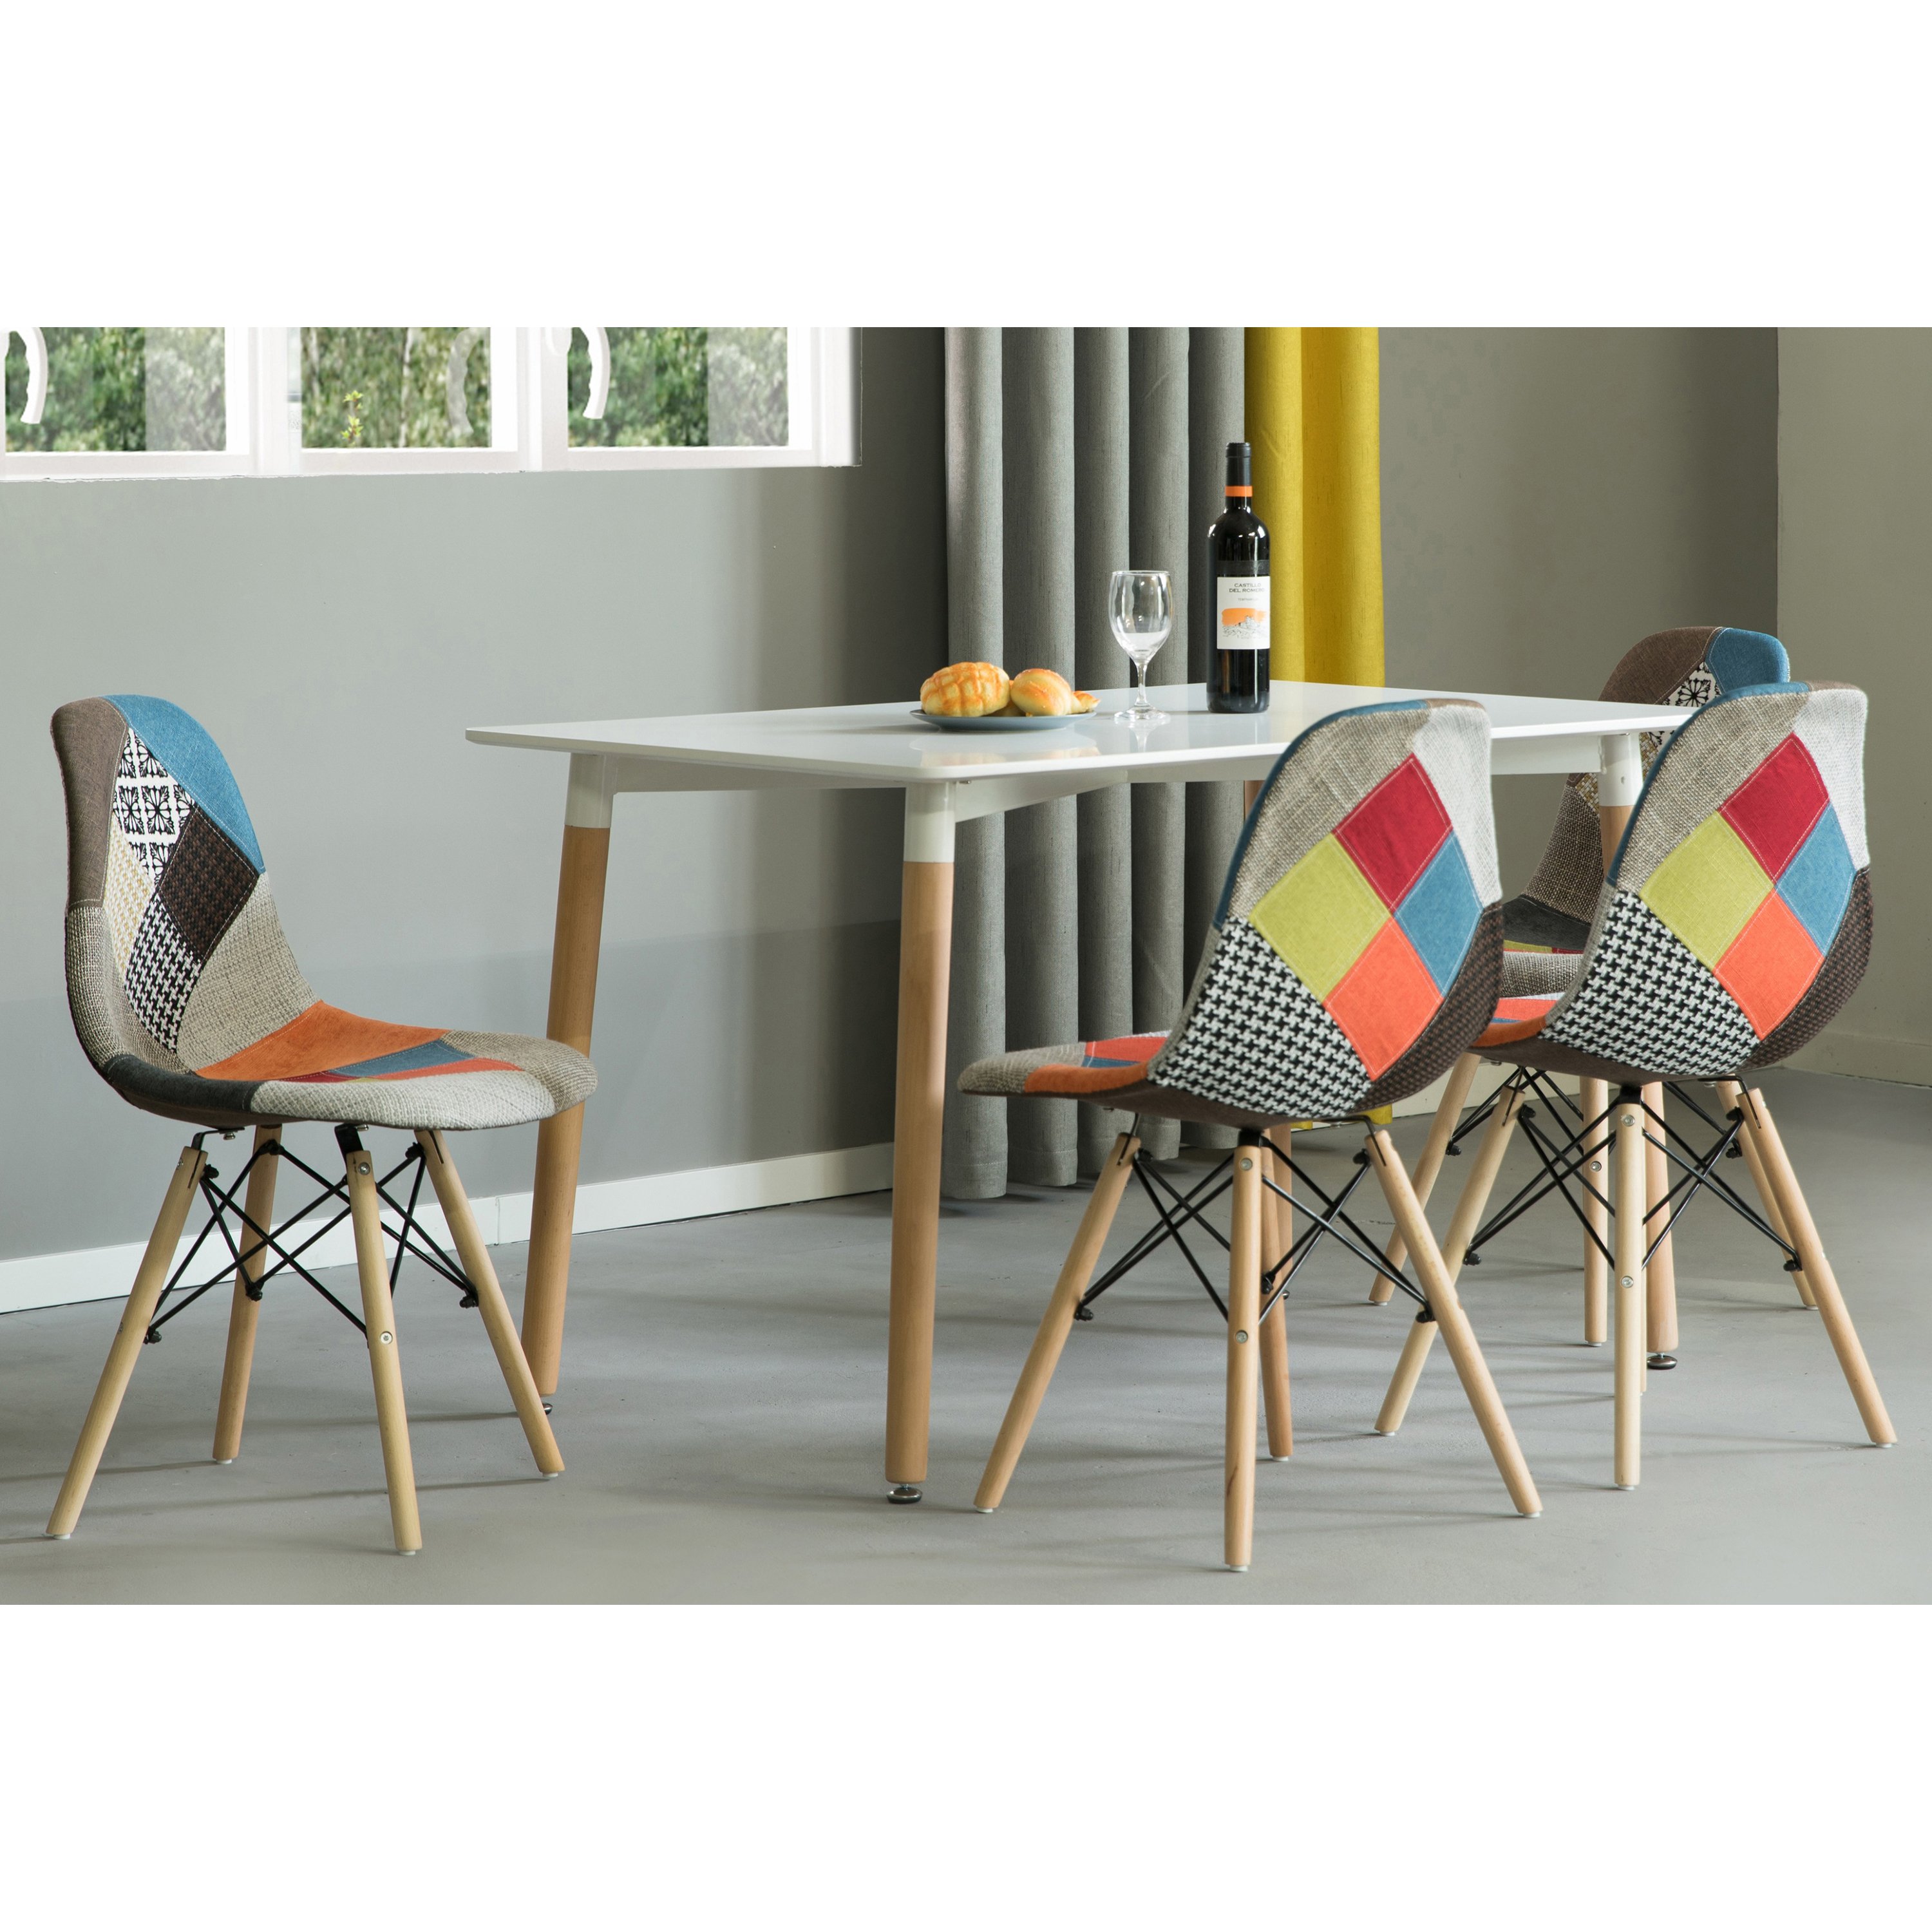 Mid-Century Modern Upholstered Plastic Multicolor Fabric Patchwork DSW Shell Dining Chair With Wooden Dowel Eiffel Legs - Set Of 4 Multicolo